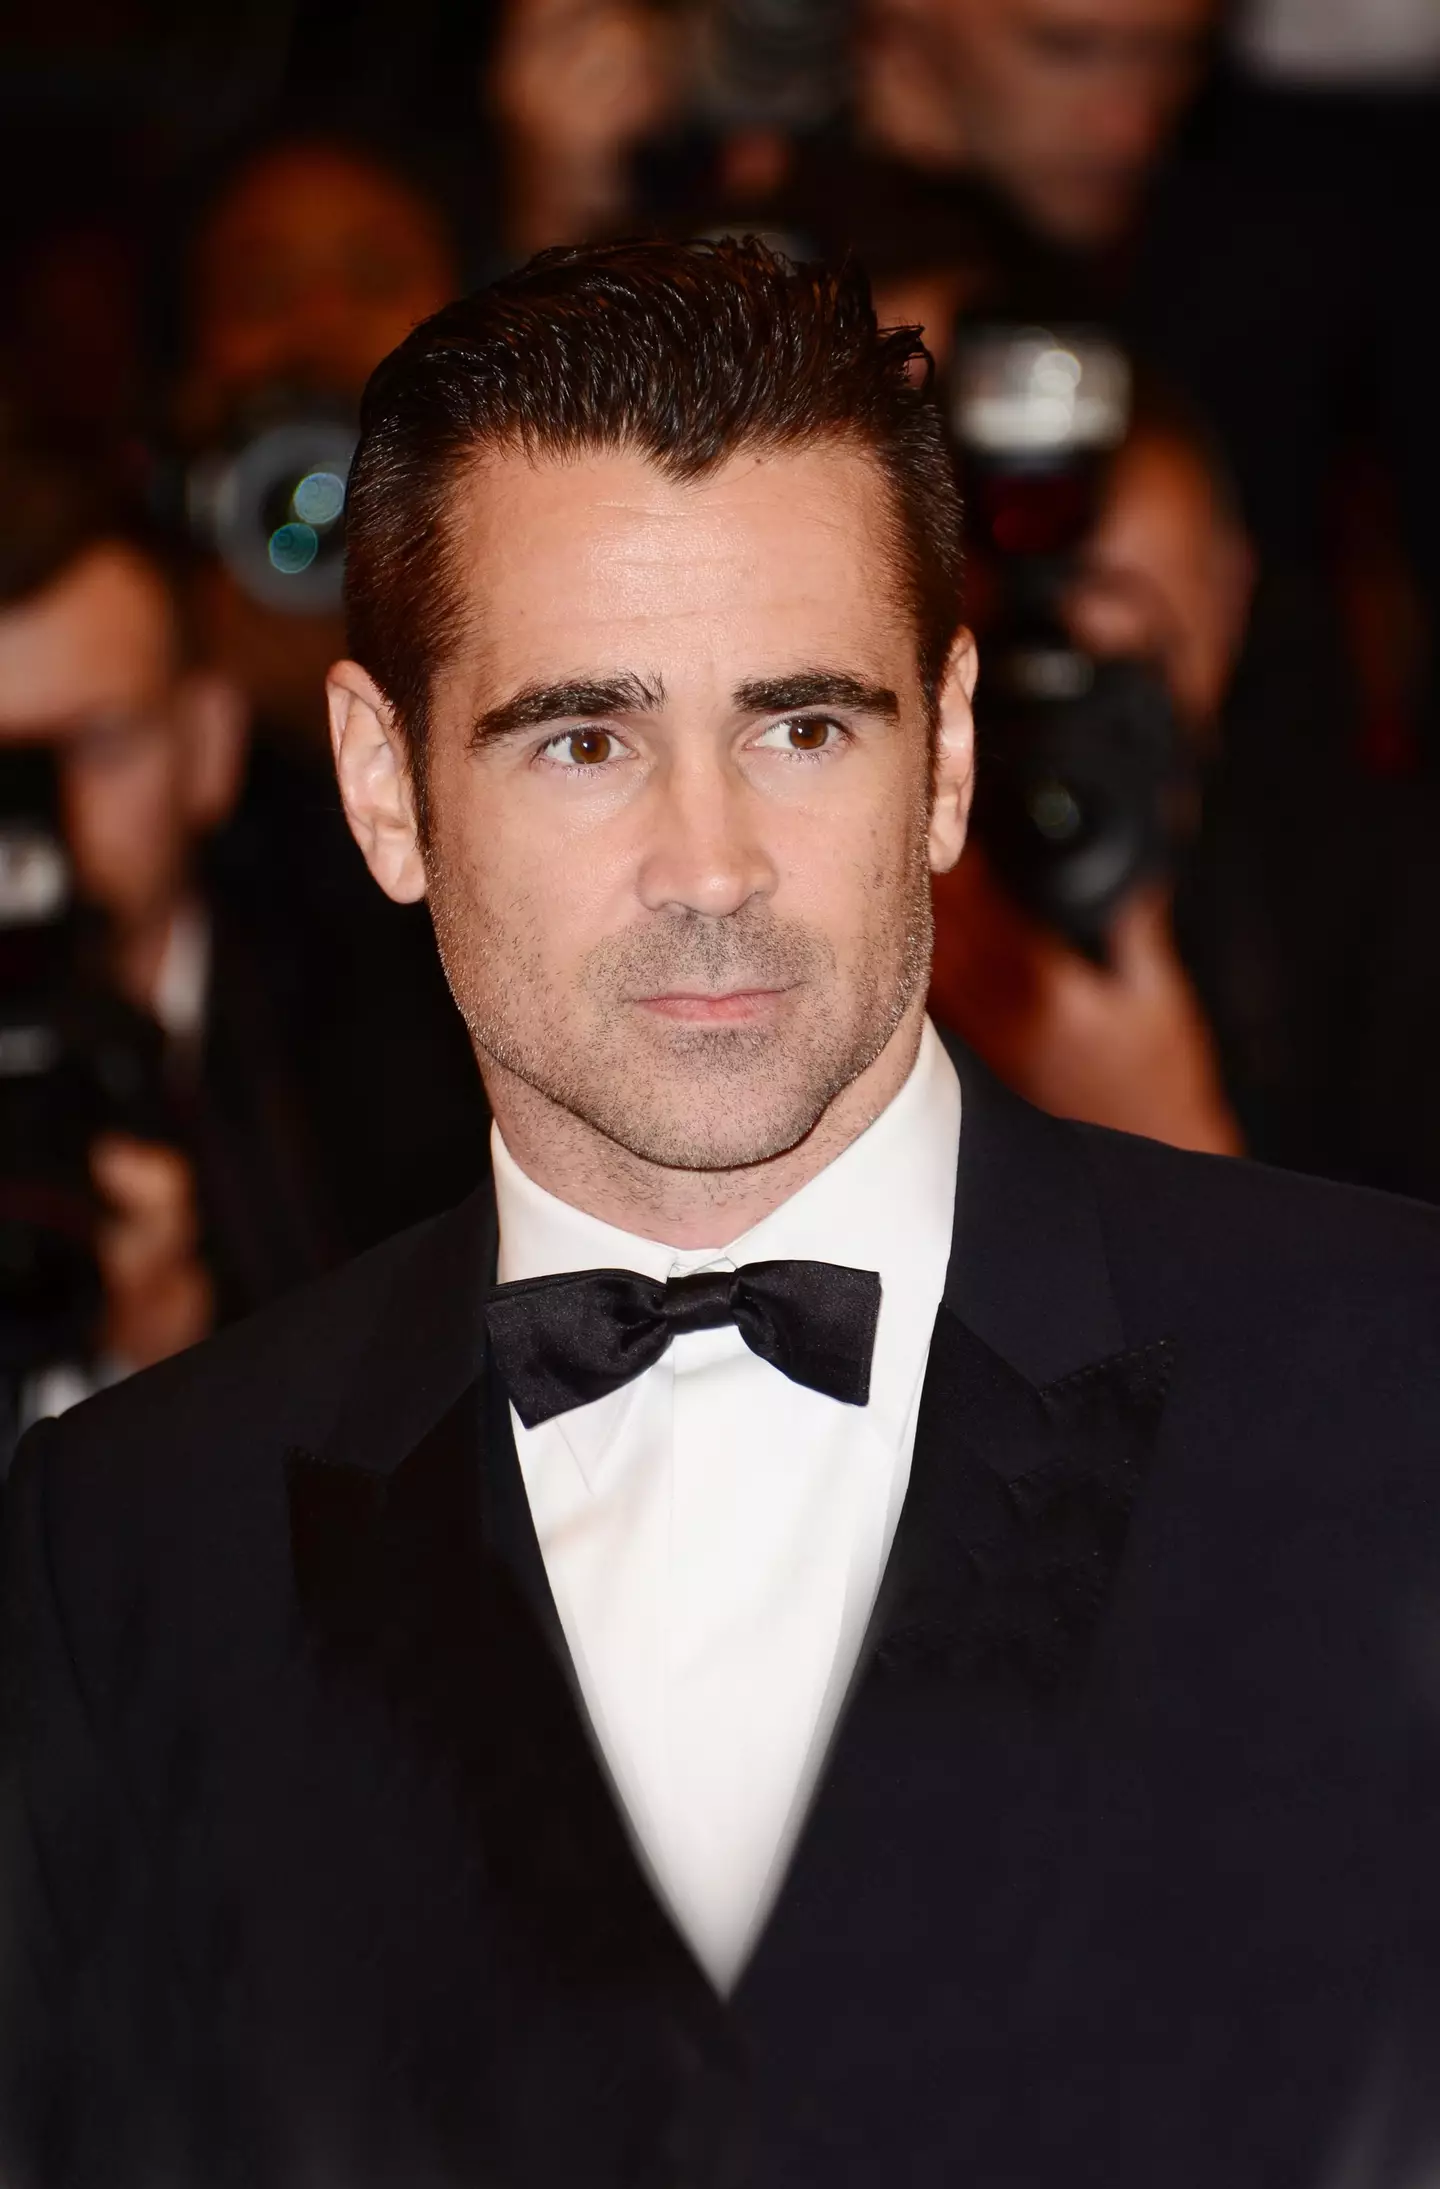 The pub has finally lifted their ban on Colin Farrell after his 'outrageous' behaviour.